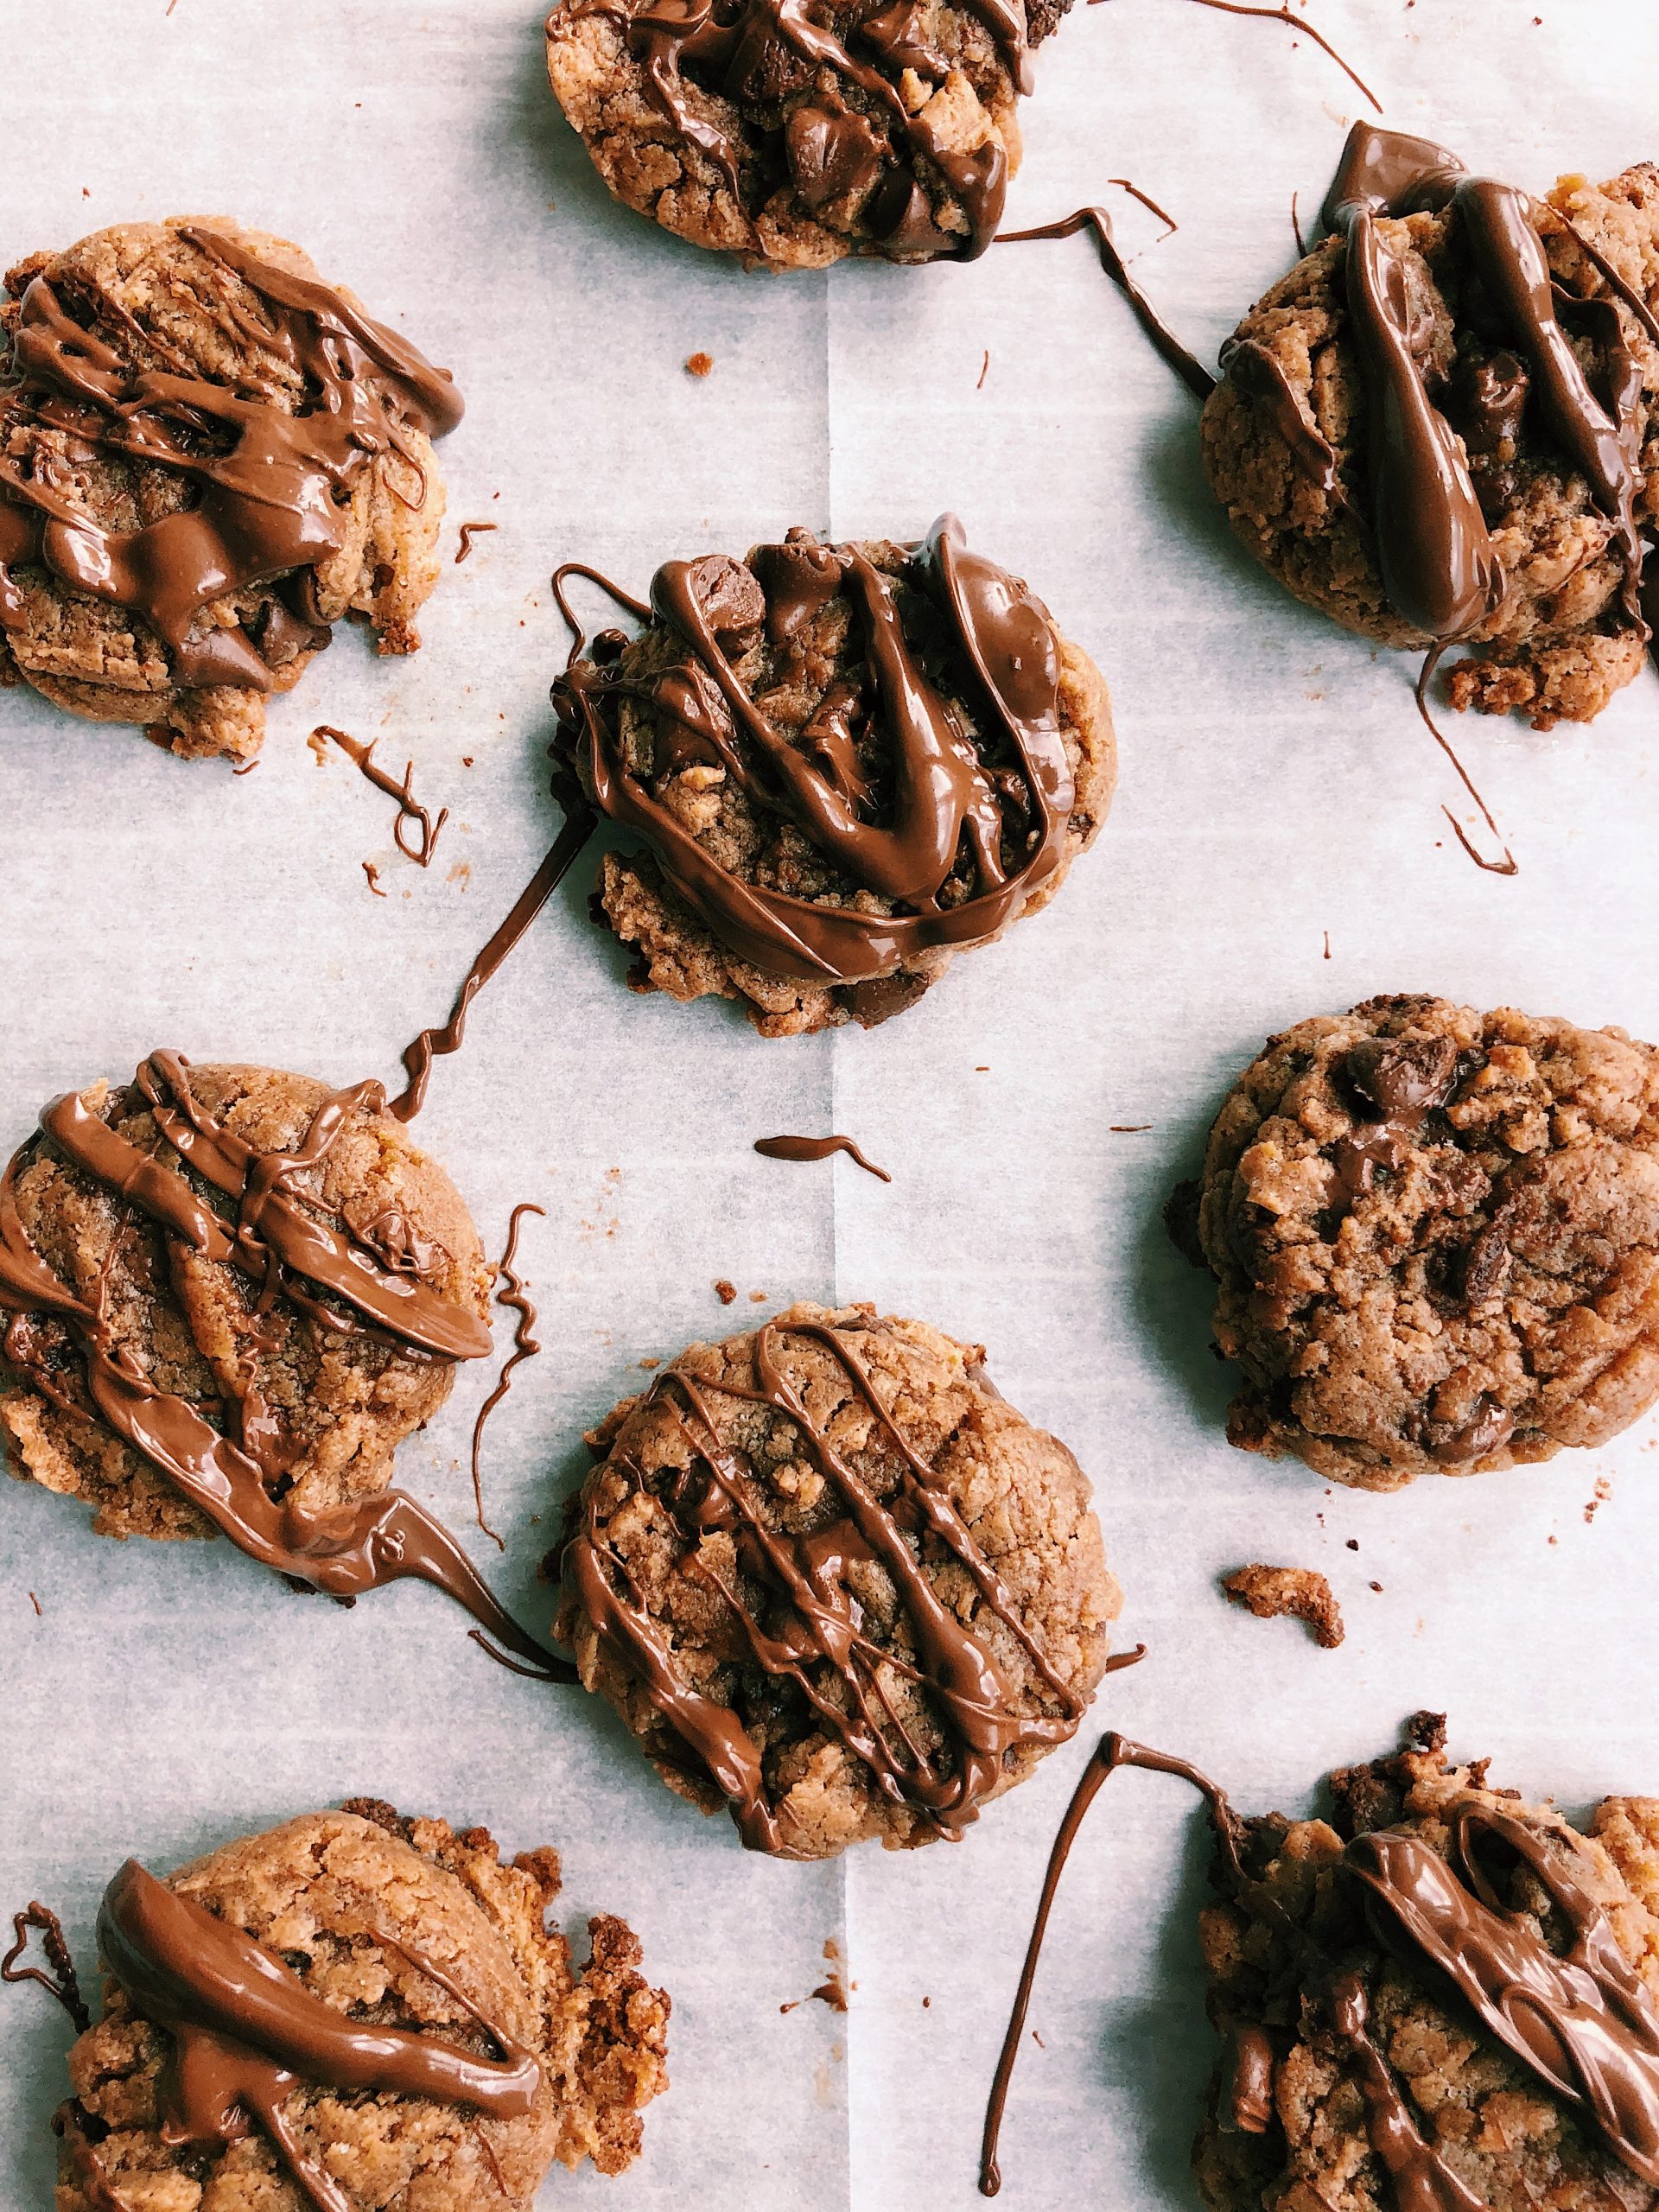 small almond butter cookies drizzled in chocolate on parchment paper